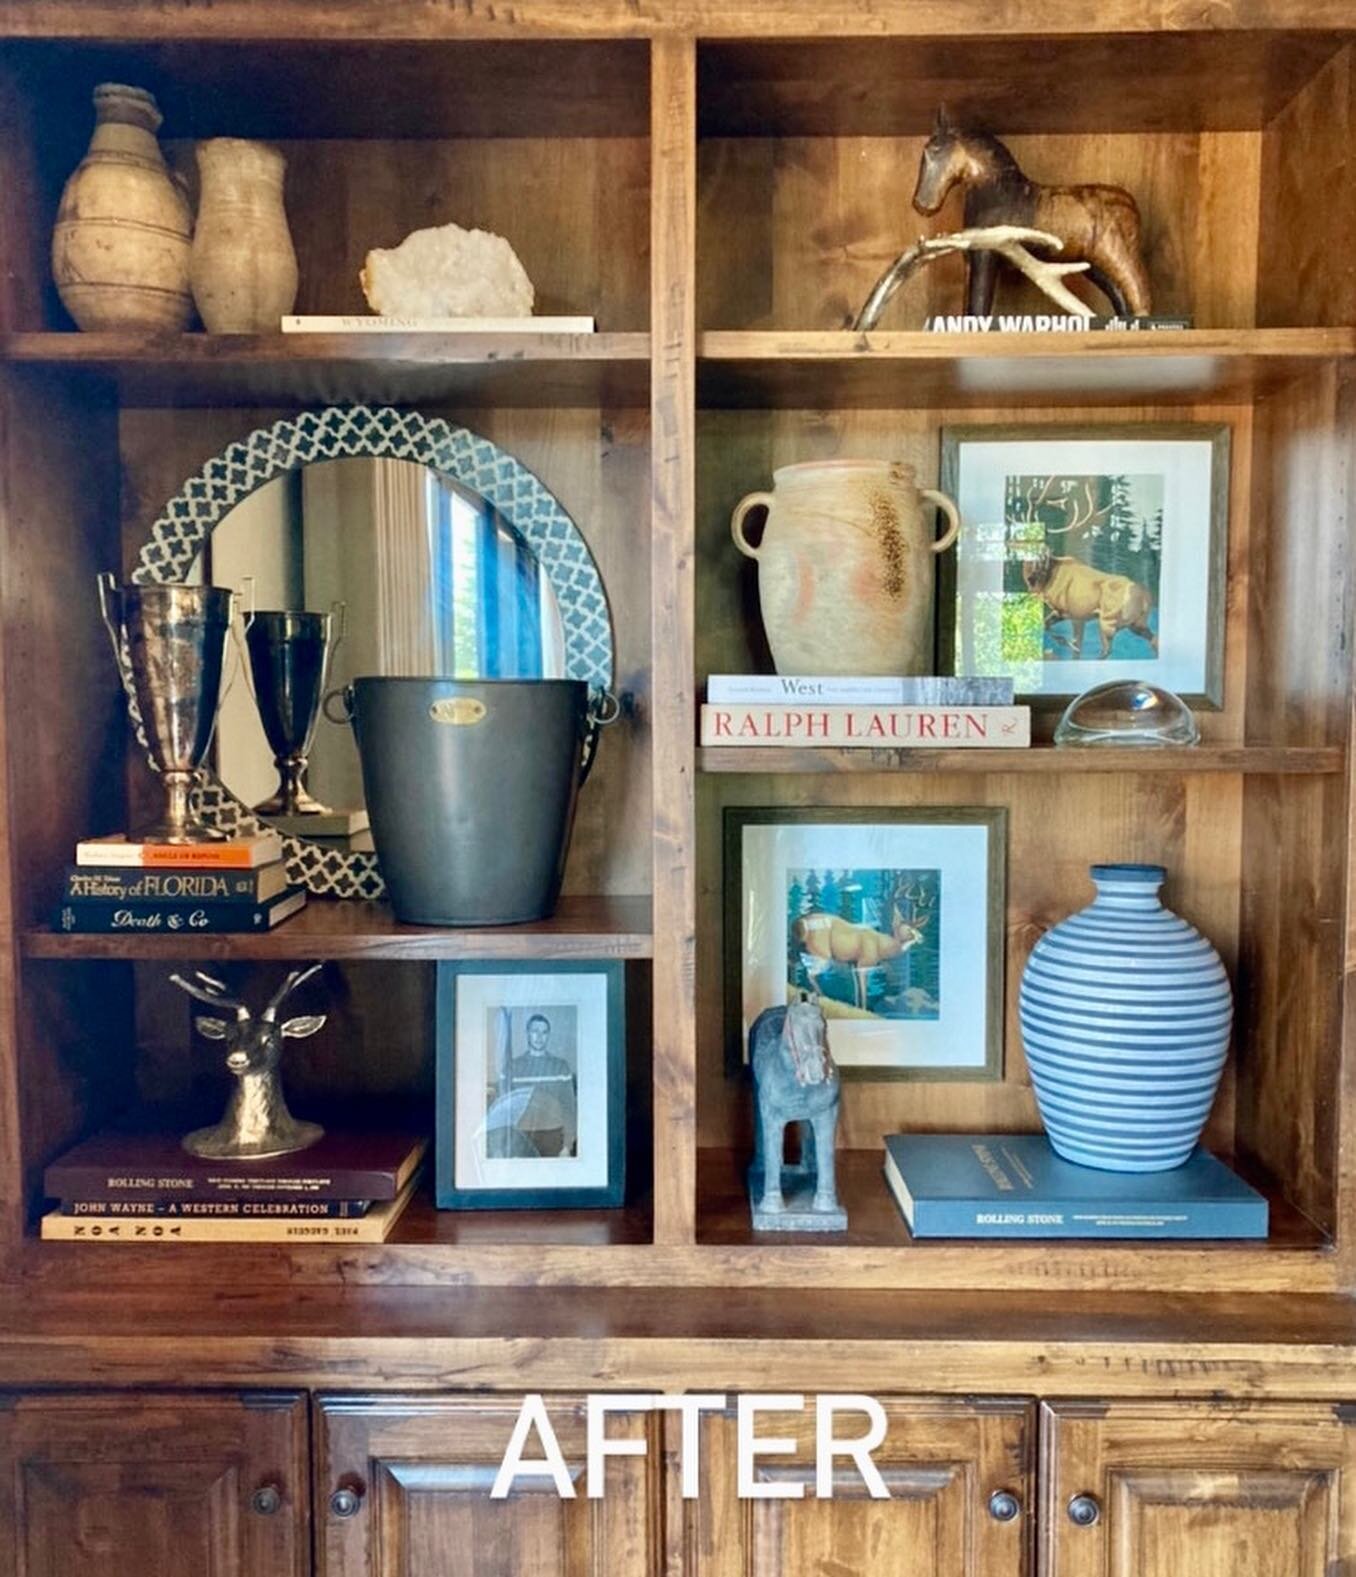 AFTER/BEFORE &mdash;swipe Right➡️
We had so much fun collecting items for our client to re-do some shelves in their gorgeous greatroom.  #interiors #design #vintage #mountaindandy #jhbooktrader #locallove #etsy